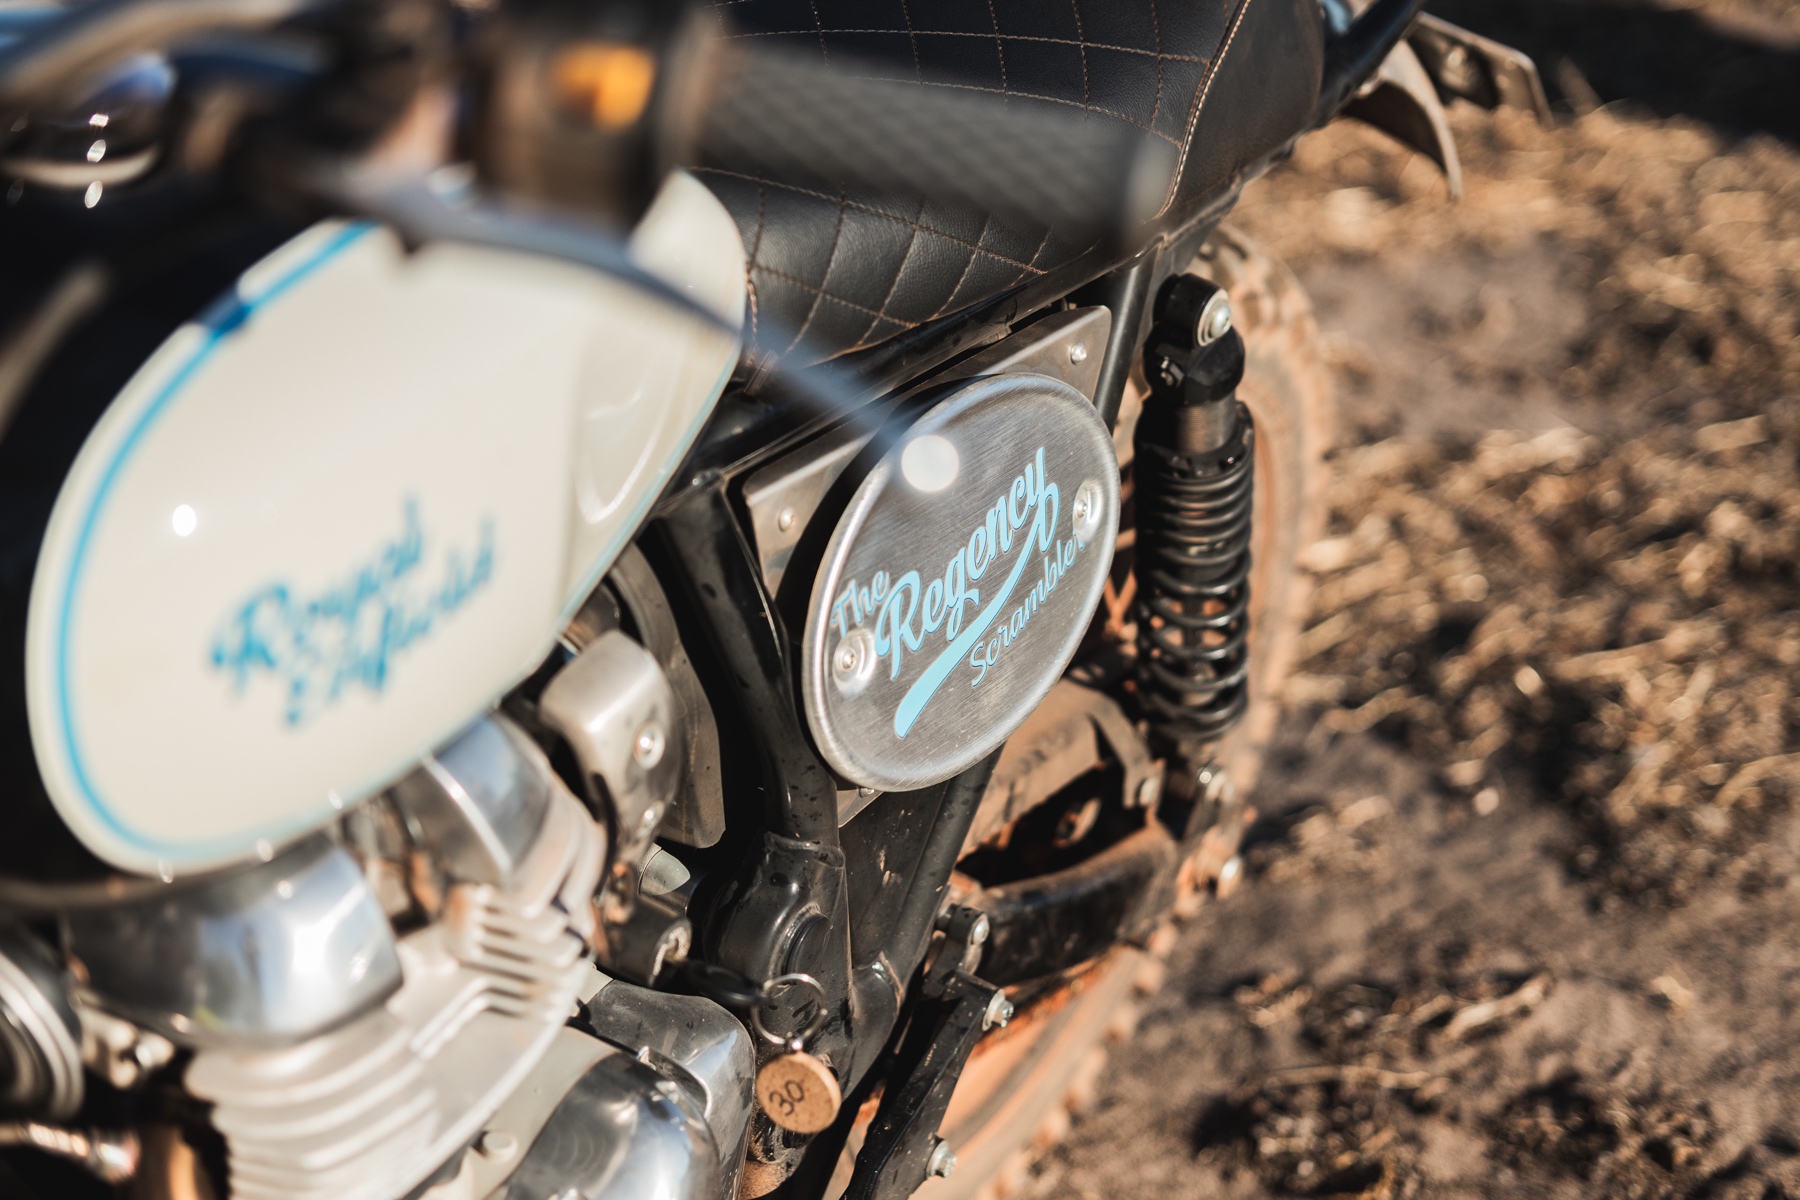 Close up detail photo of a Royal Enfield scrambler motorcycle side panel with painted lettering